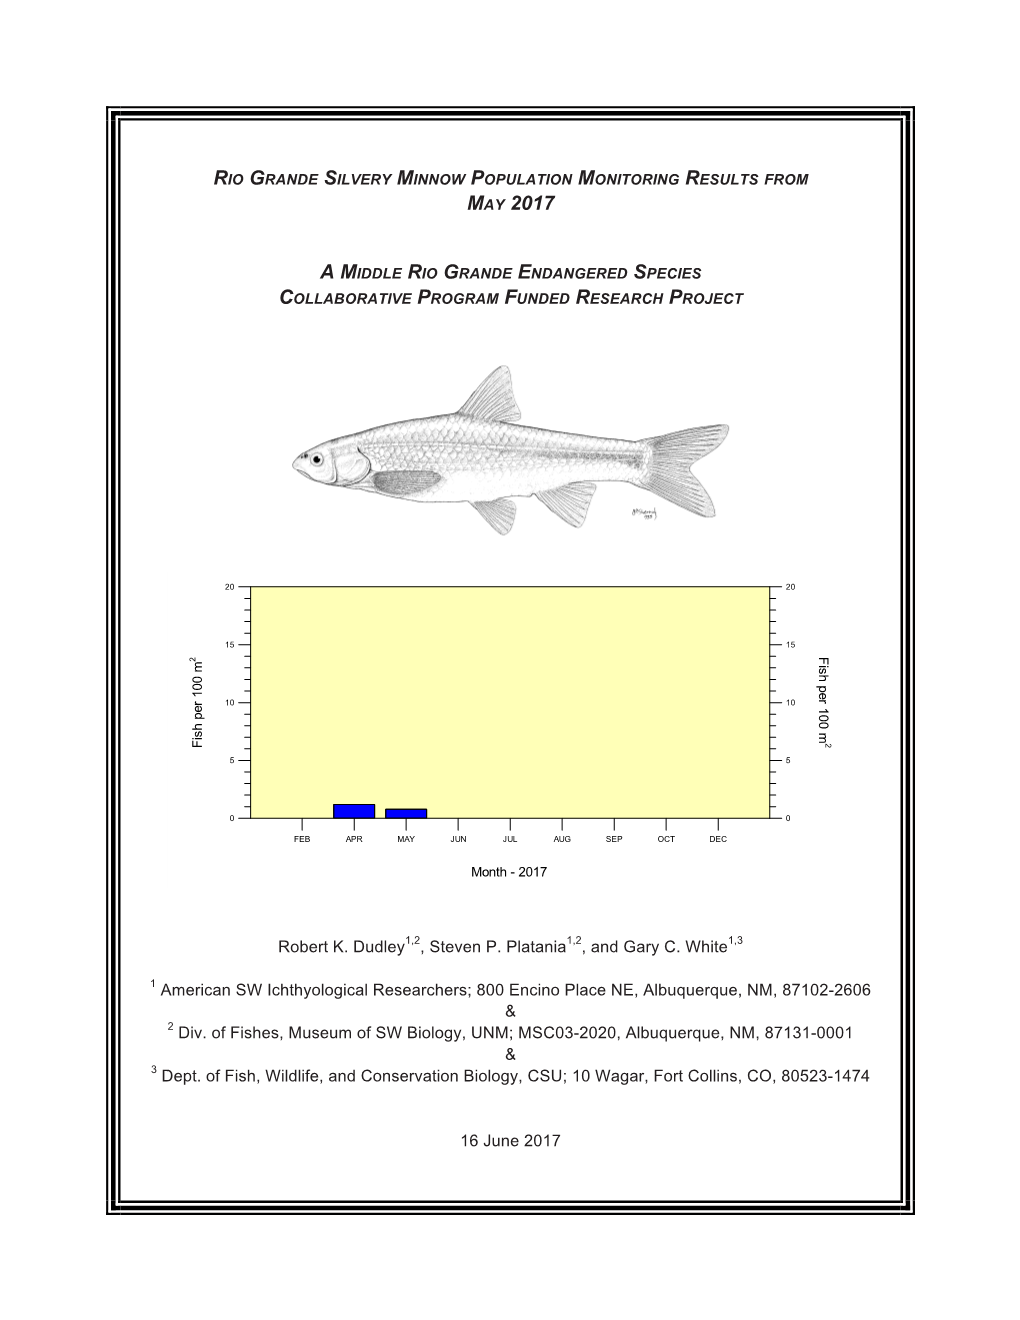 Rio Grande Silvery Minnow Population Monitoring Results from May 2017